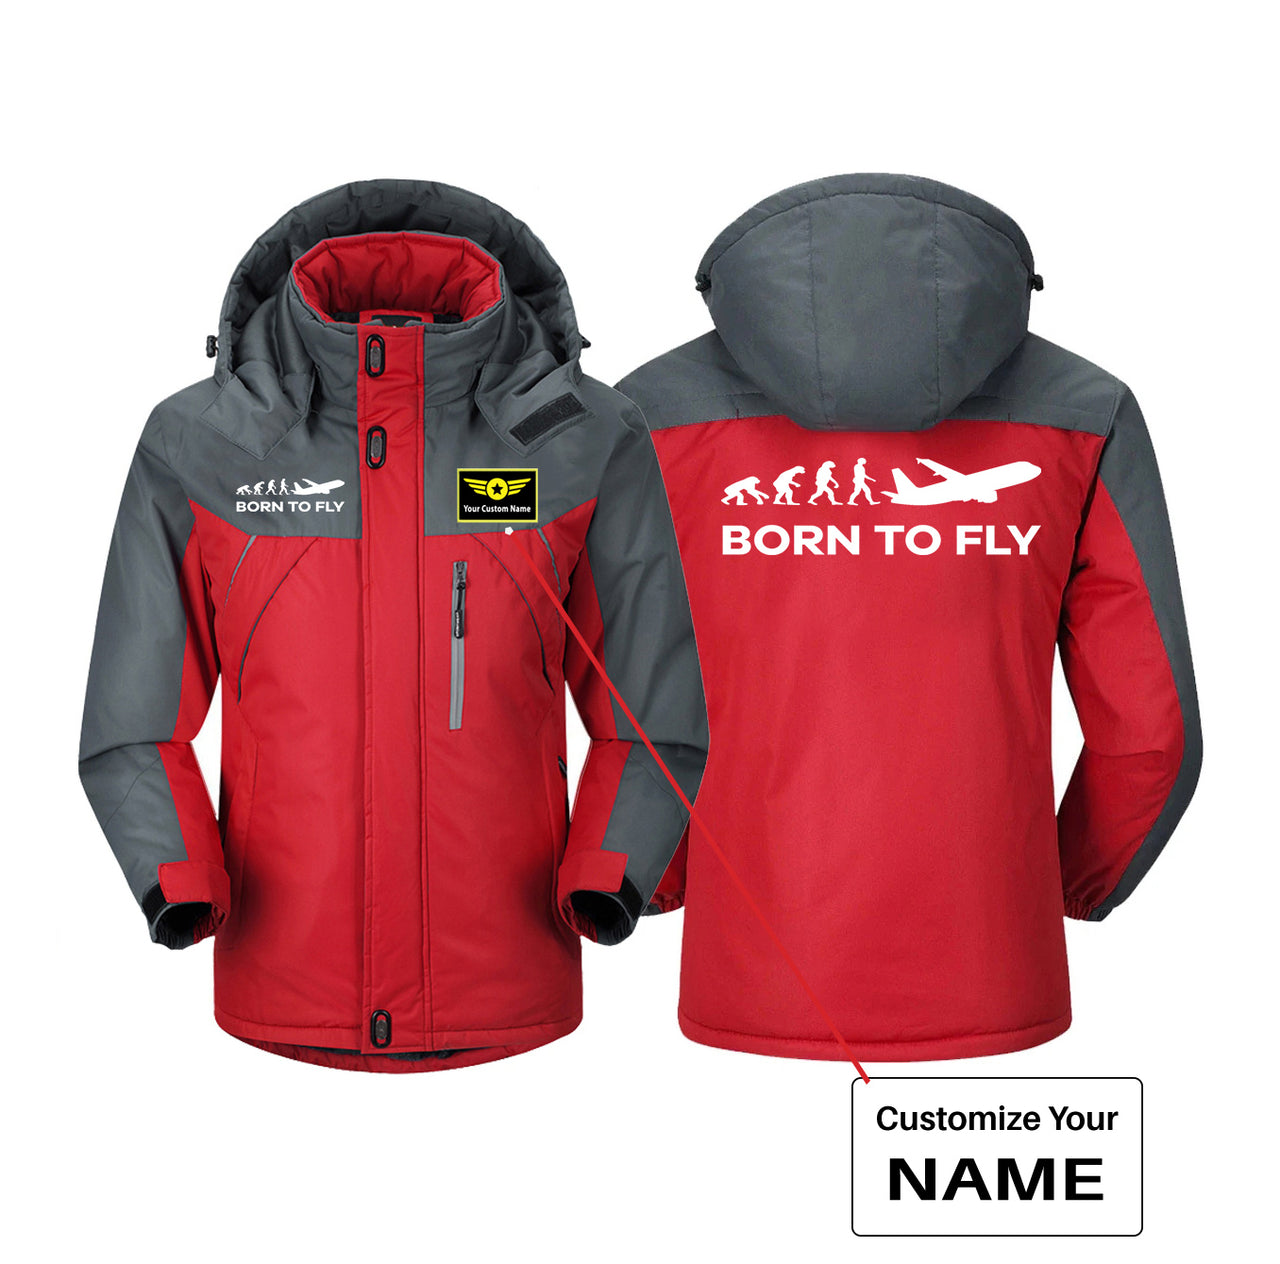 Born To Fly Designed Thick Winter Jackets